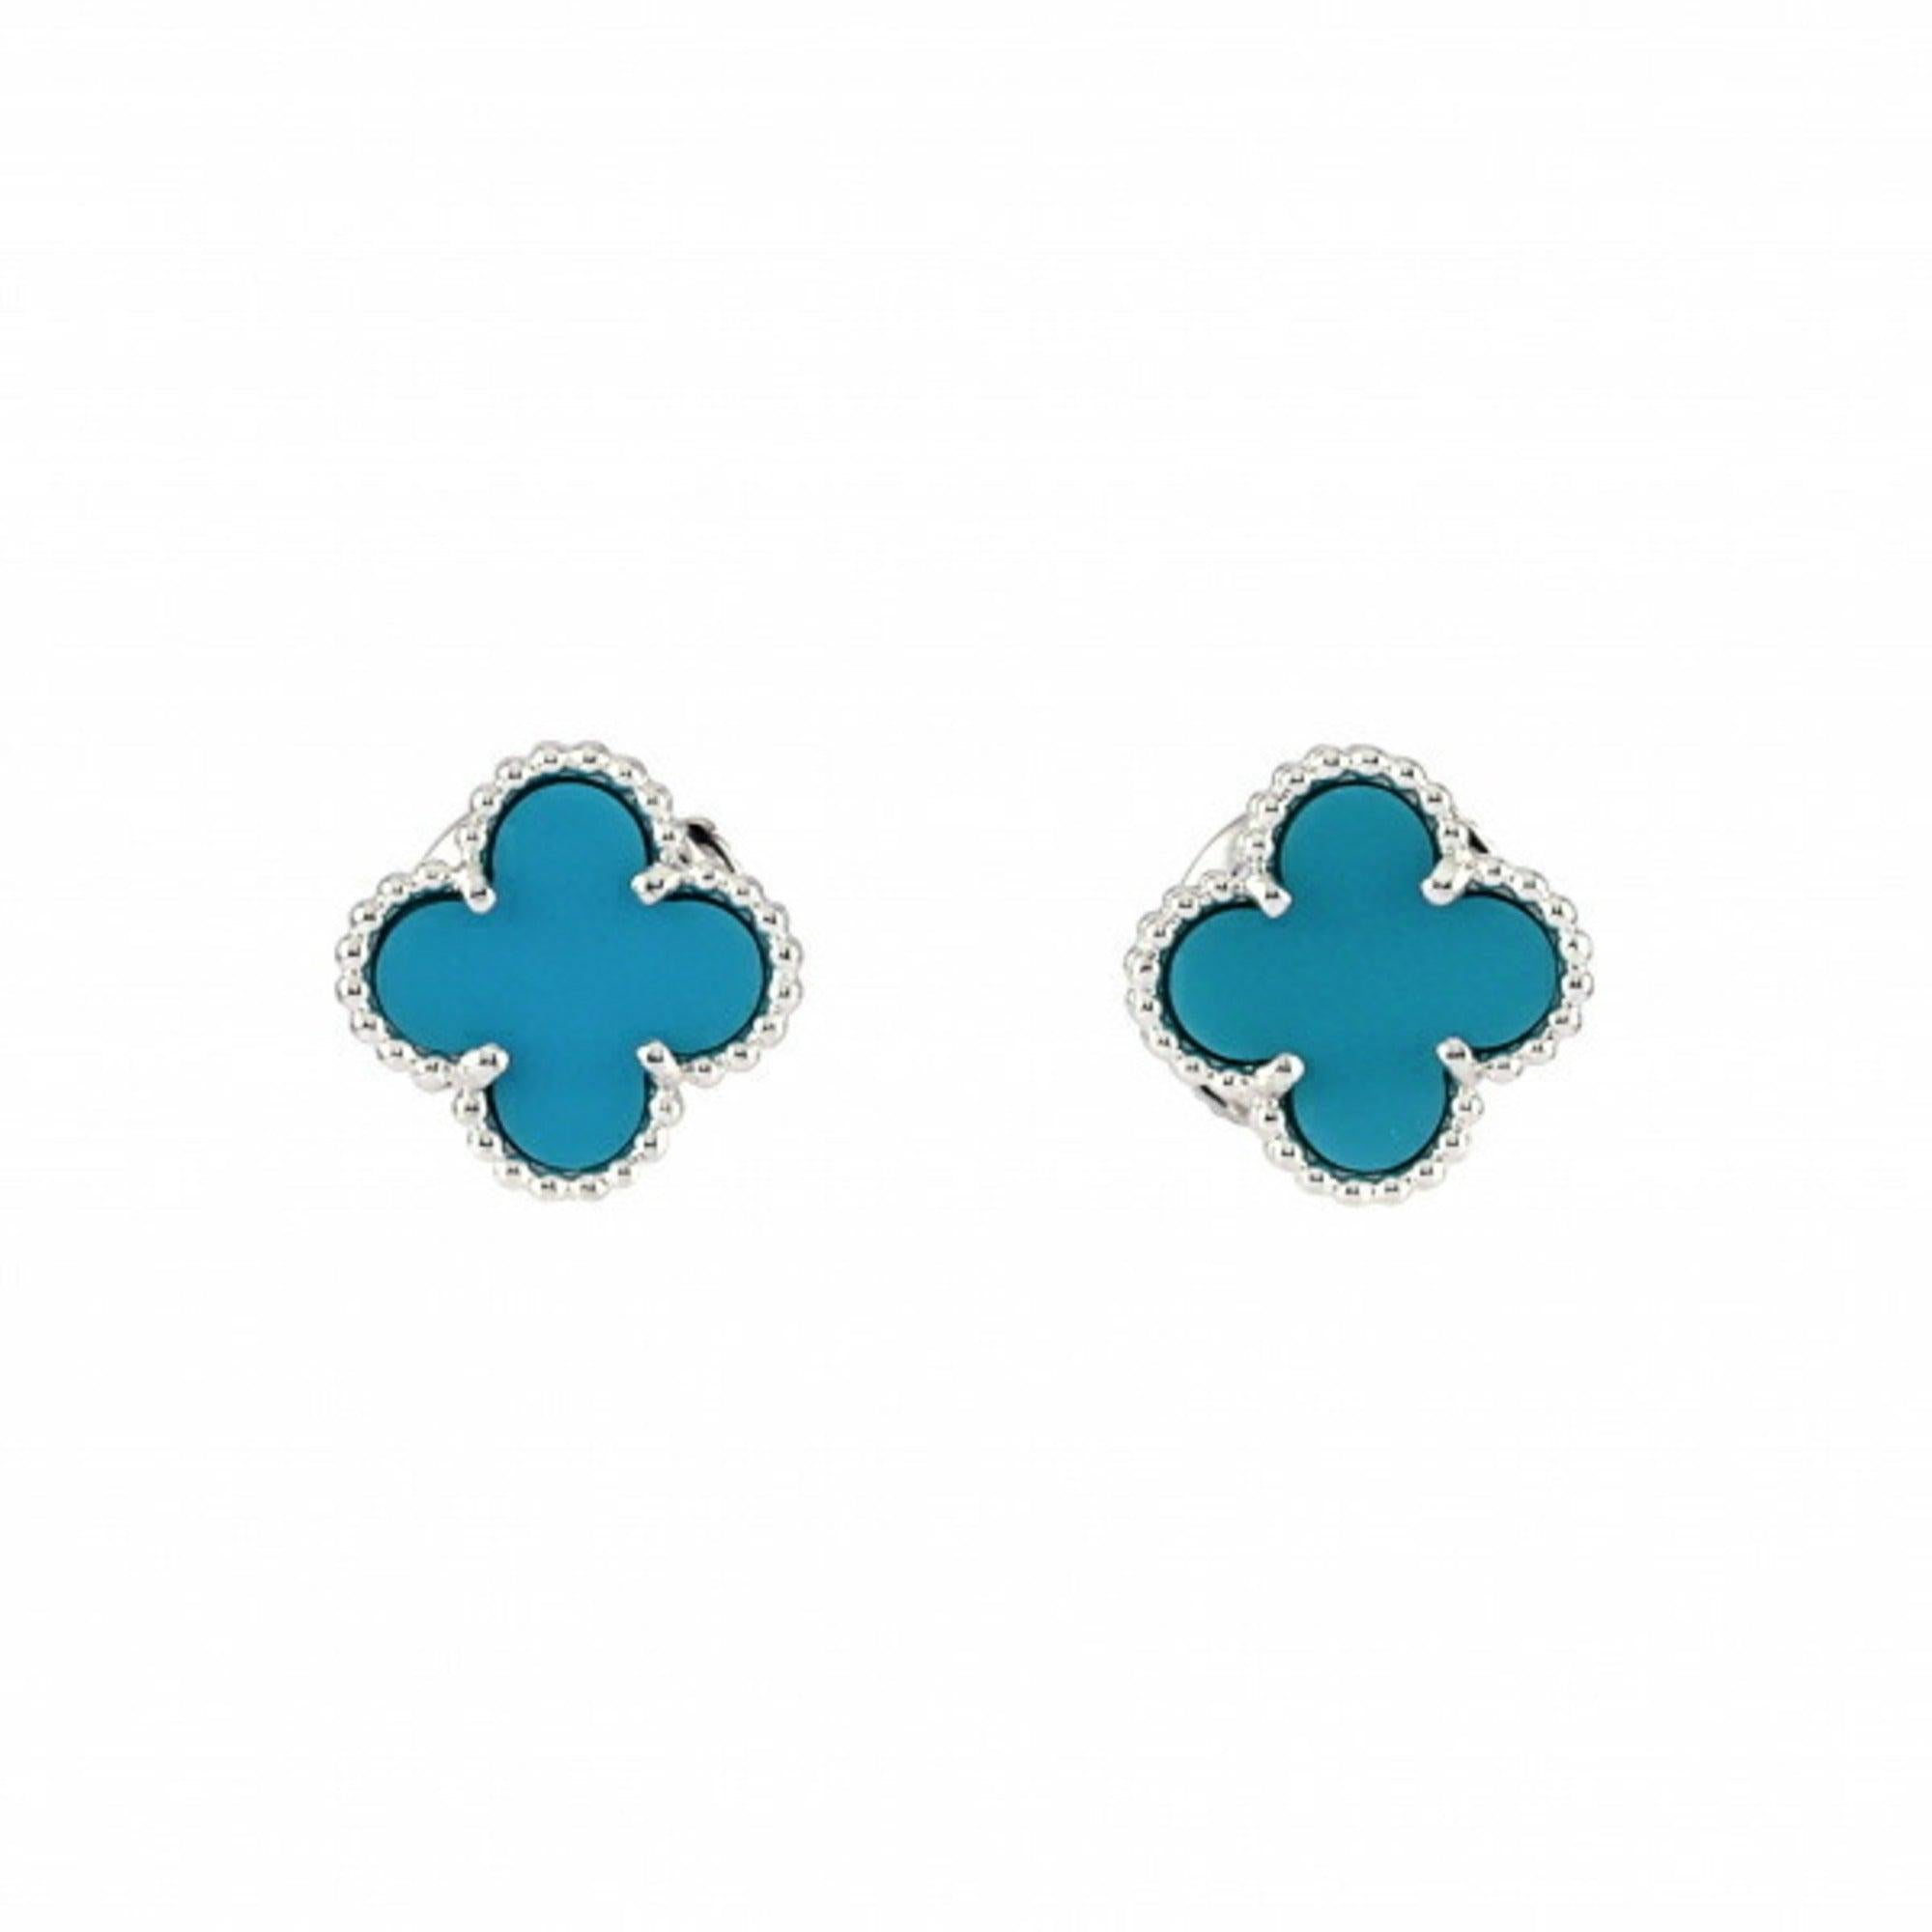 Van Cleef & Arpels Sweet Alhambra Earrings in 18K White Gold

Additional information:
Brand: Van Cleef & Arpels
Gender: Women
Line: Sweet Alhambra
MPN: VCARA44500
Material: White gold (18K)
Condition detail: This item has been used and may have some